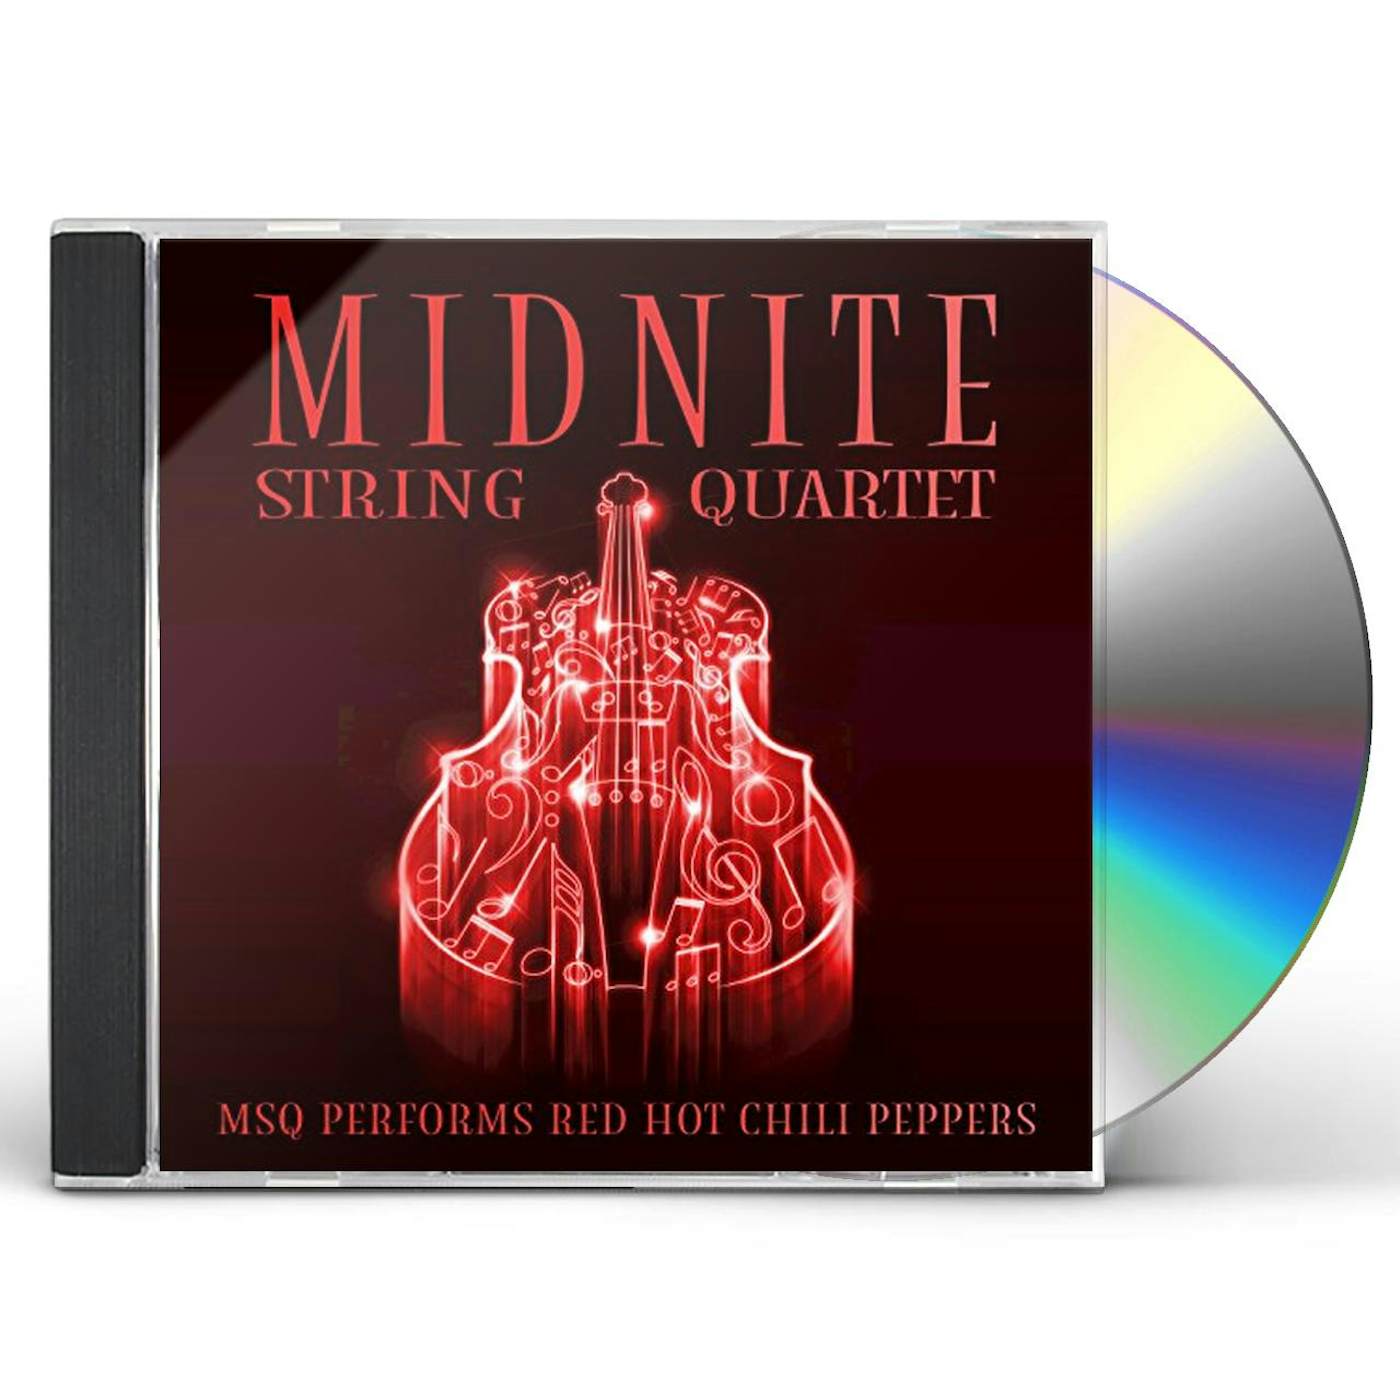 Midnite String Quartet MSQ PERFORMS RED HOT CHILI PEPPERS (MOD) CD